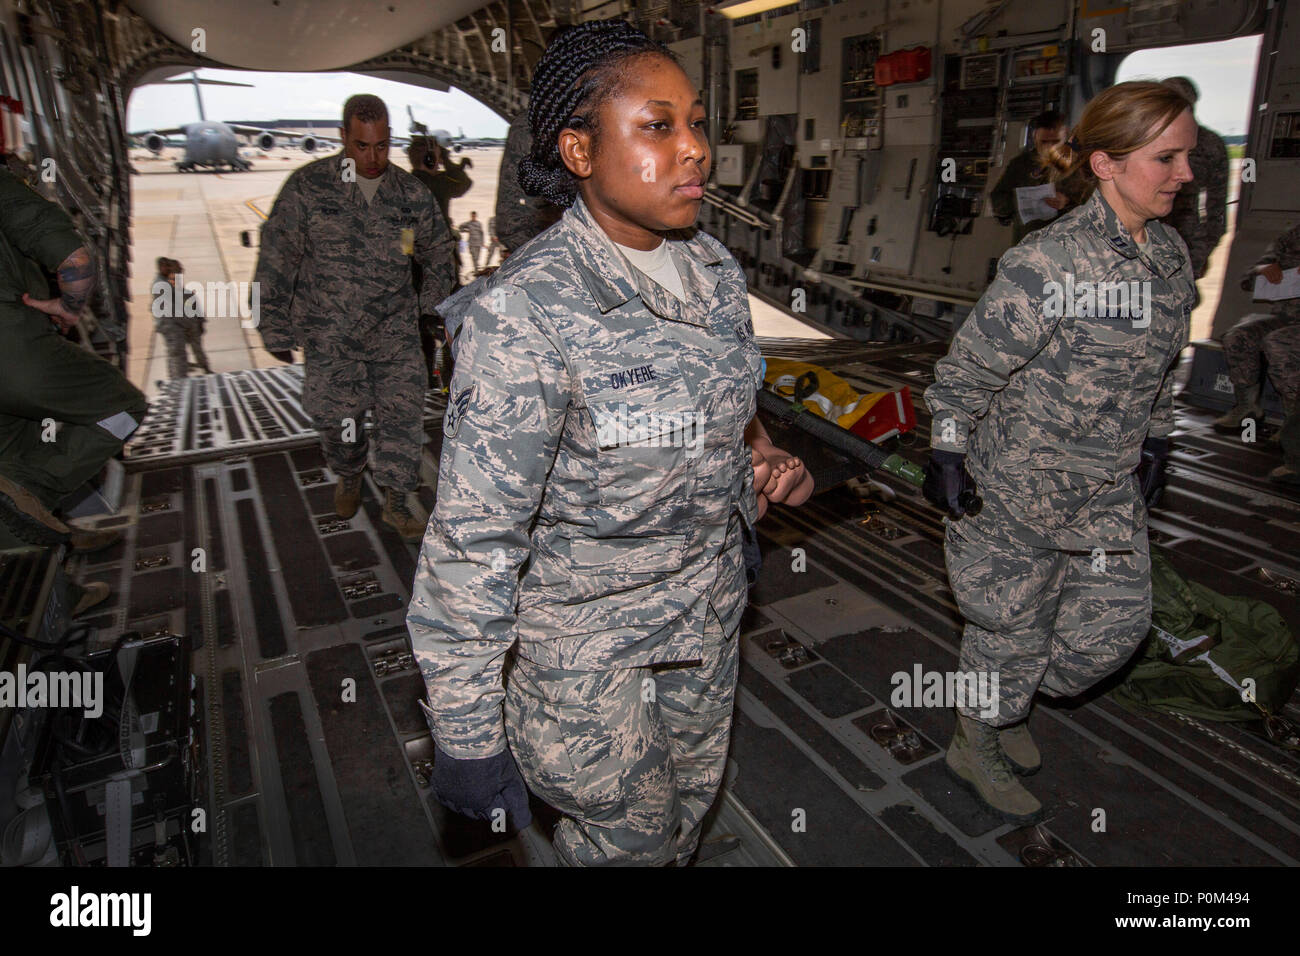 U.S. Air Force Senior Airman Selina N. Okyere, center, 514th Aeromedical Evacuation Squadron, and Capt. Kelly M. Wanamaker, 514th Aeromedical Staging Squadron, both with the 514th Air Mobility Wing, participate in a patient loading exercise at Joint Base McGuire-Dix-Lakehurst, N.J., June 2, 2018. The 514th is an Air Force Reserve Command unit. (U.S. Air Force photo by Master Sgt. Mark C. Olsen) Stock Photo